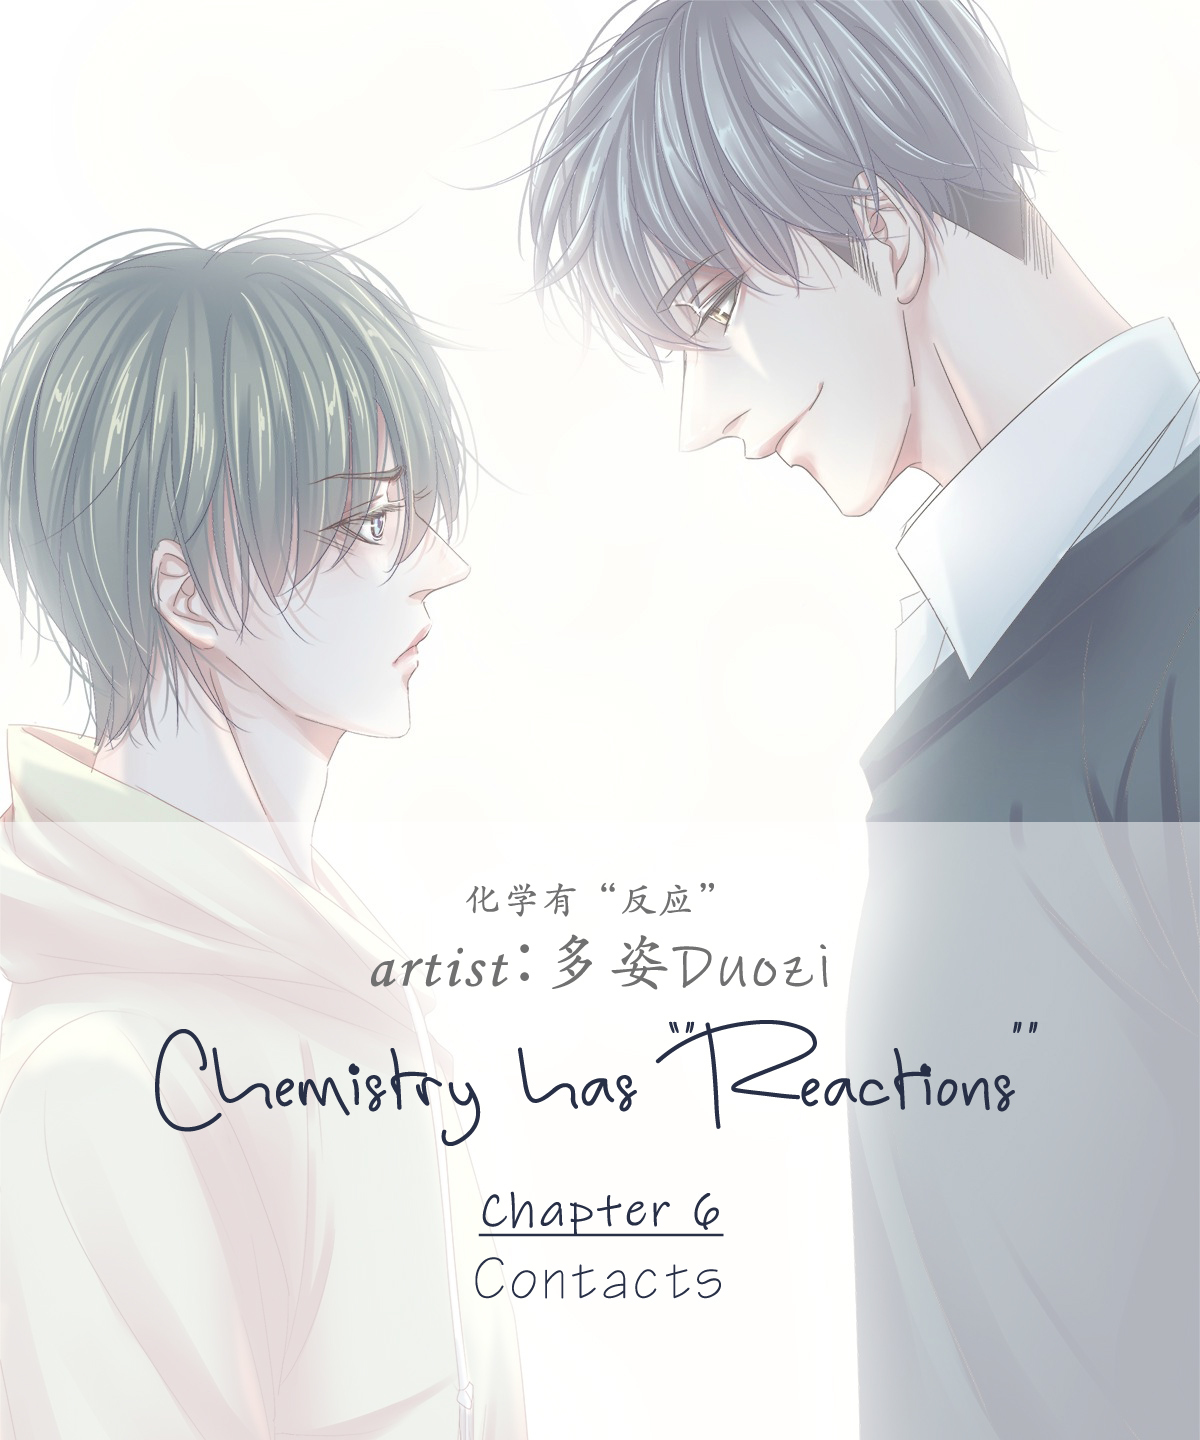 Chemistry has "Reactions" - chapter 6 - #1